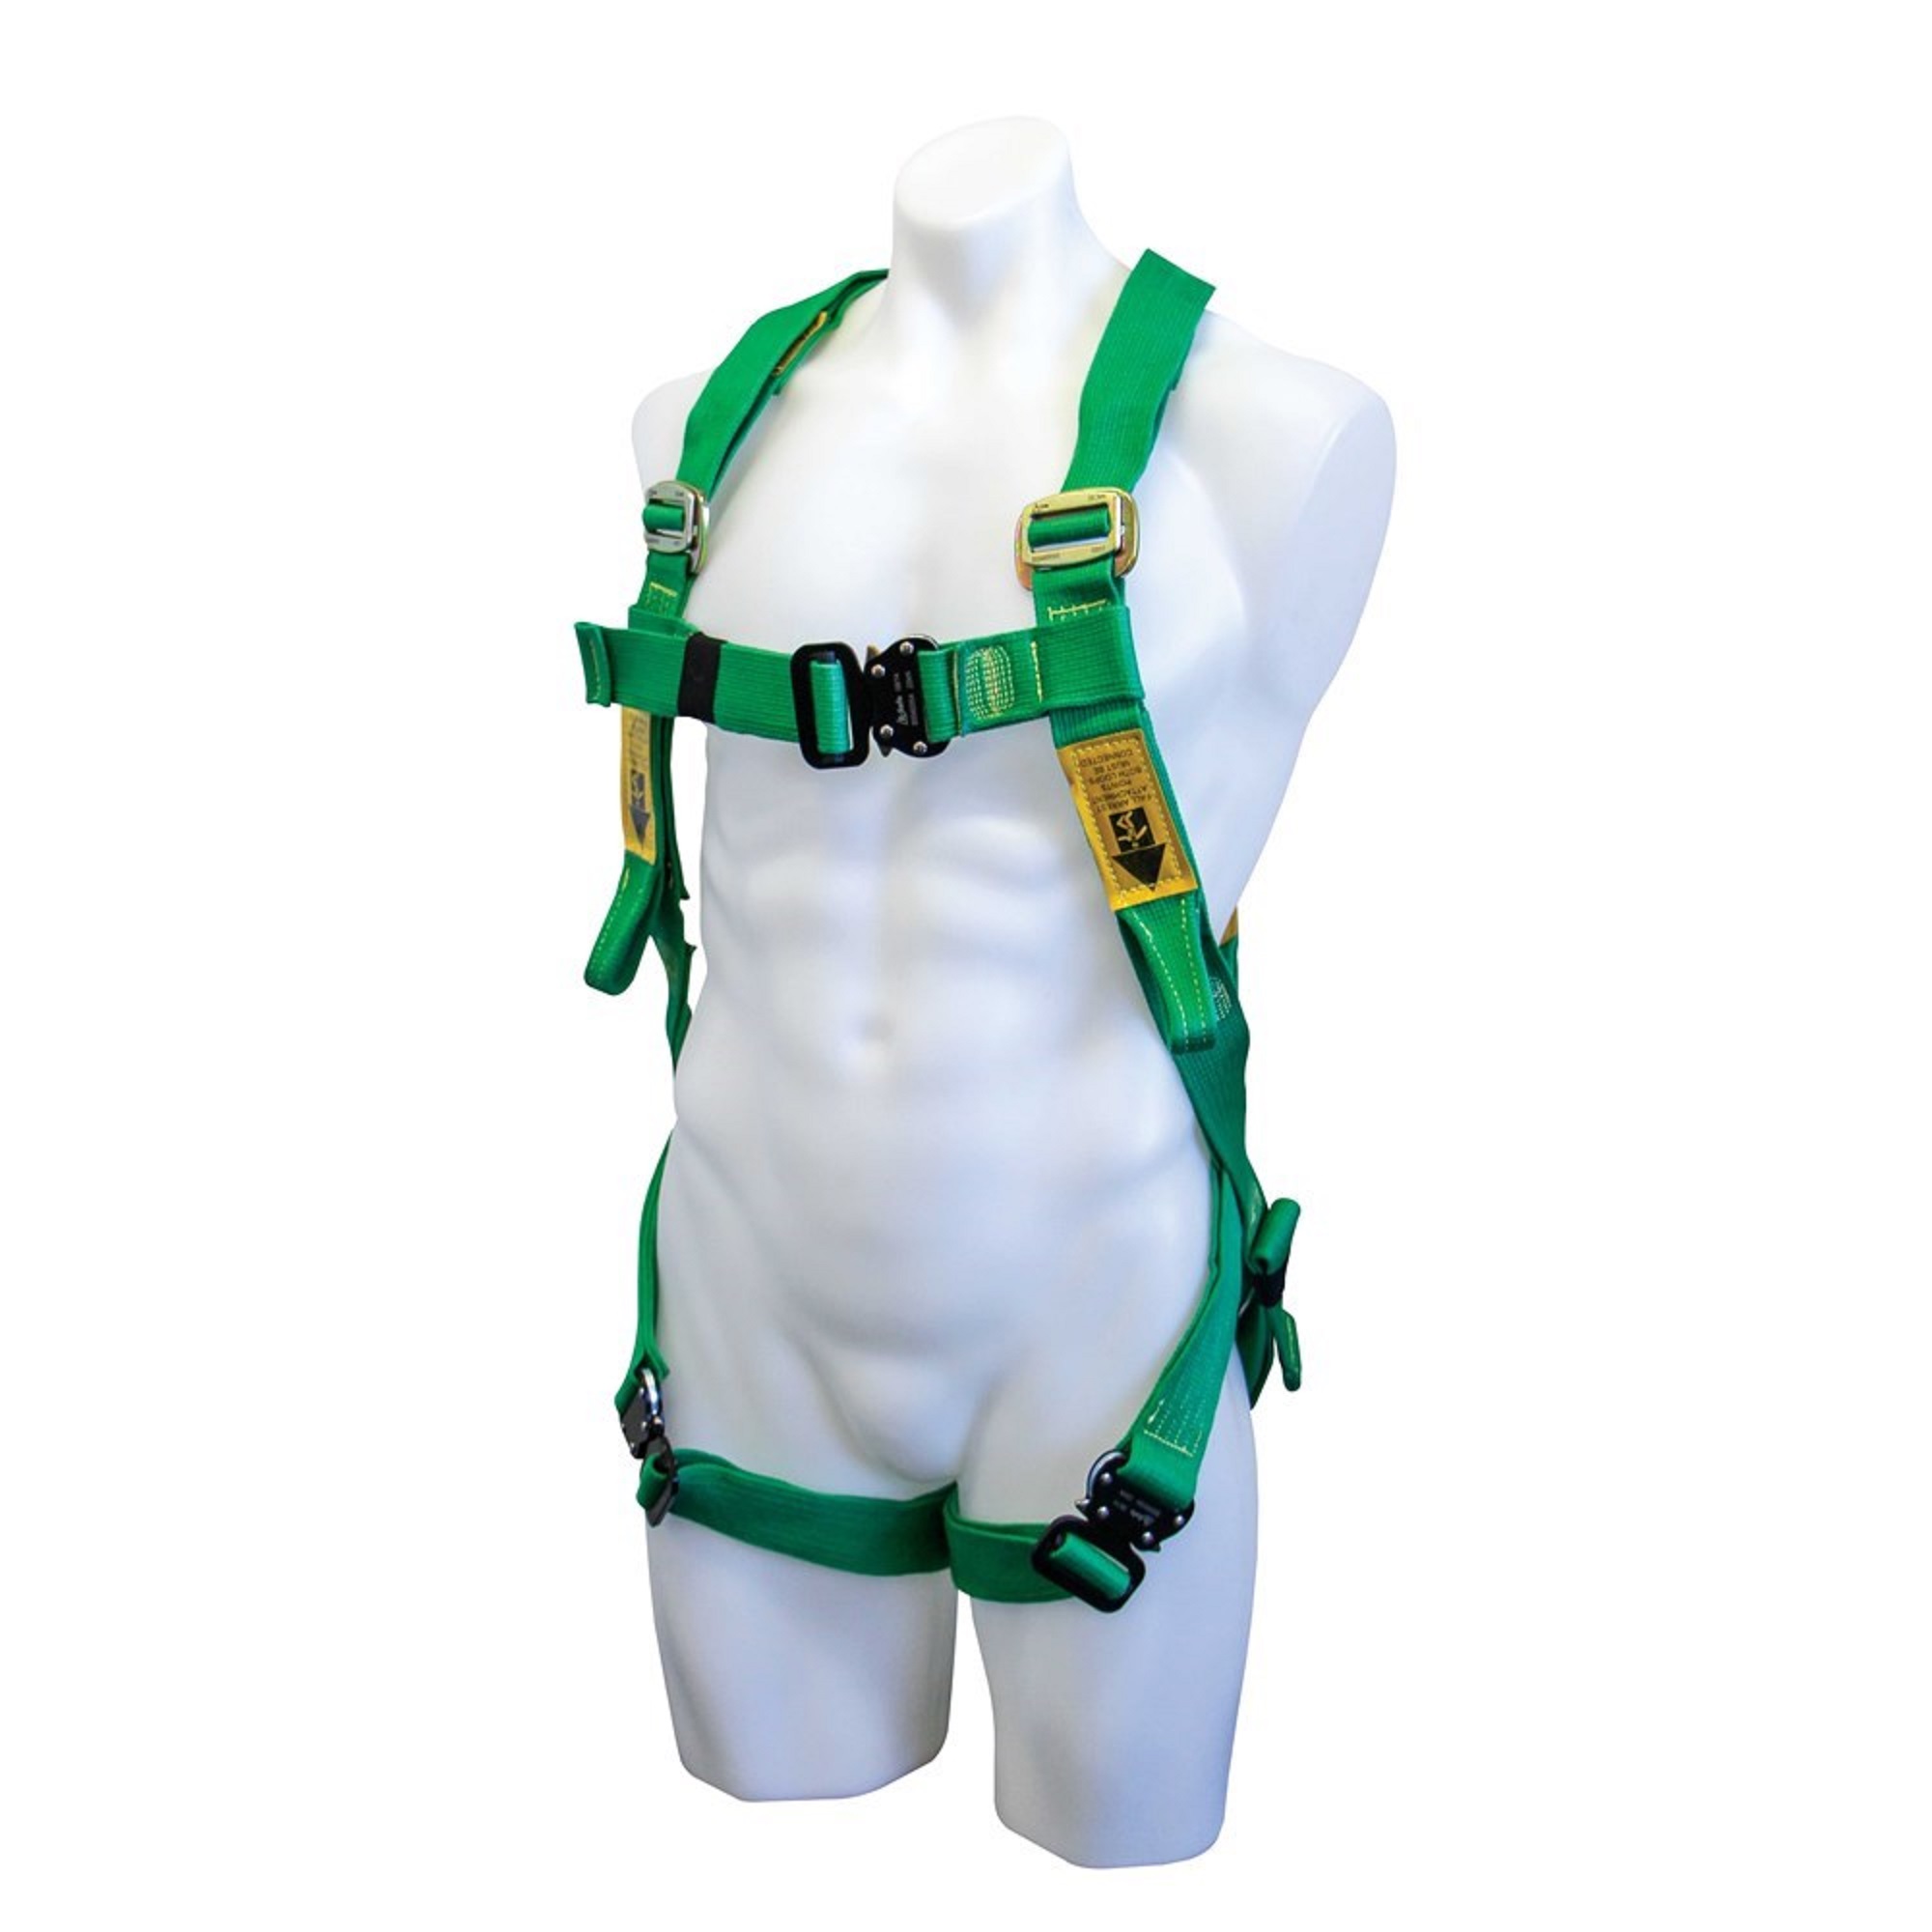 Hot Works Harnesses